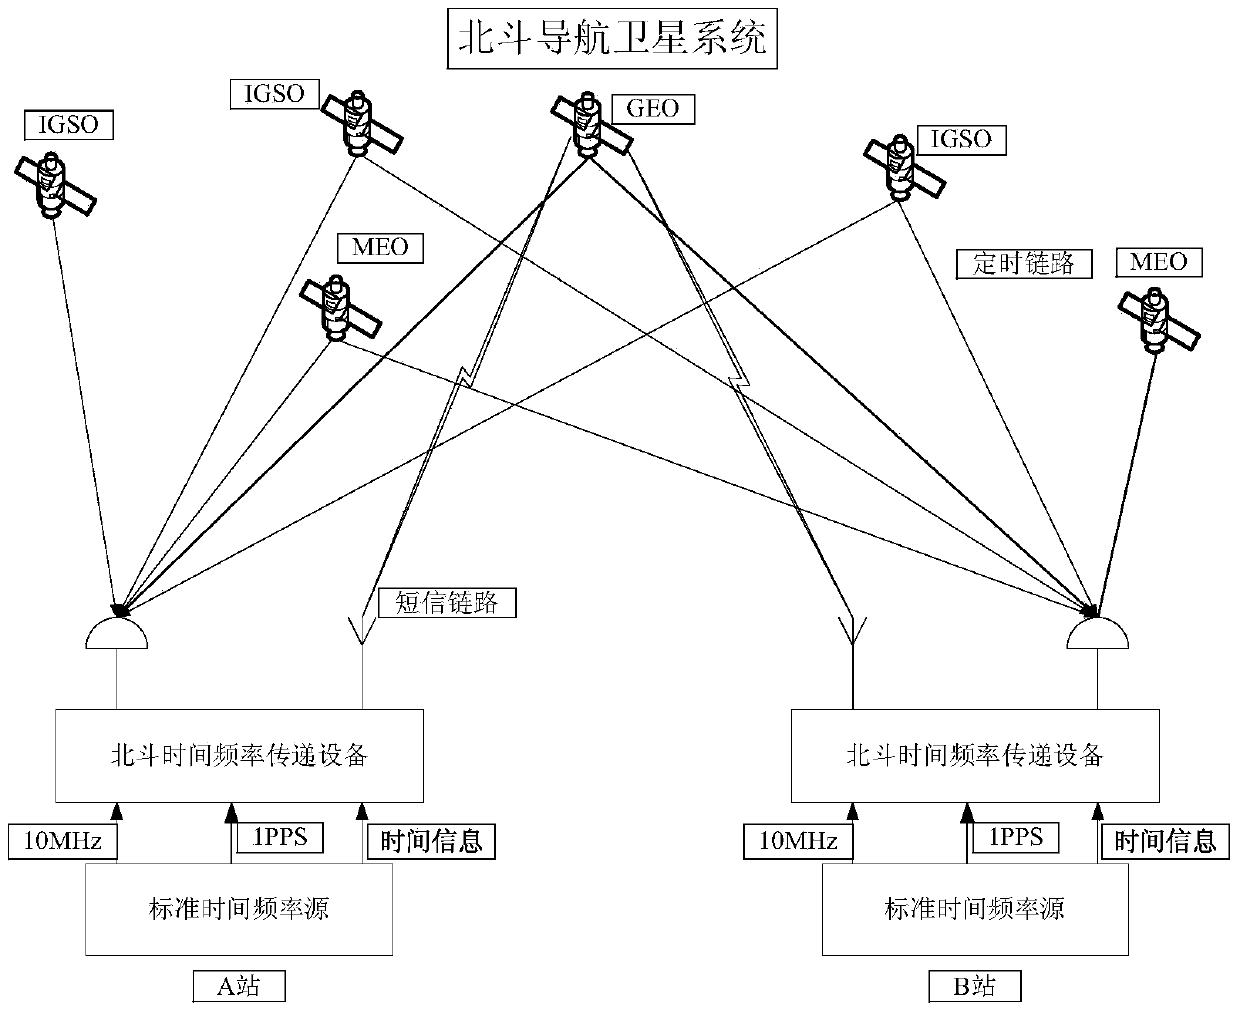 Common view time and frequency transmitting method based on BeiDou navigation satellite system